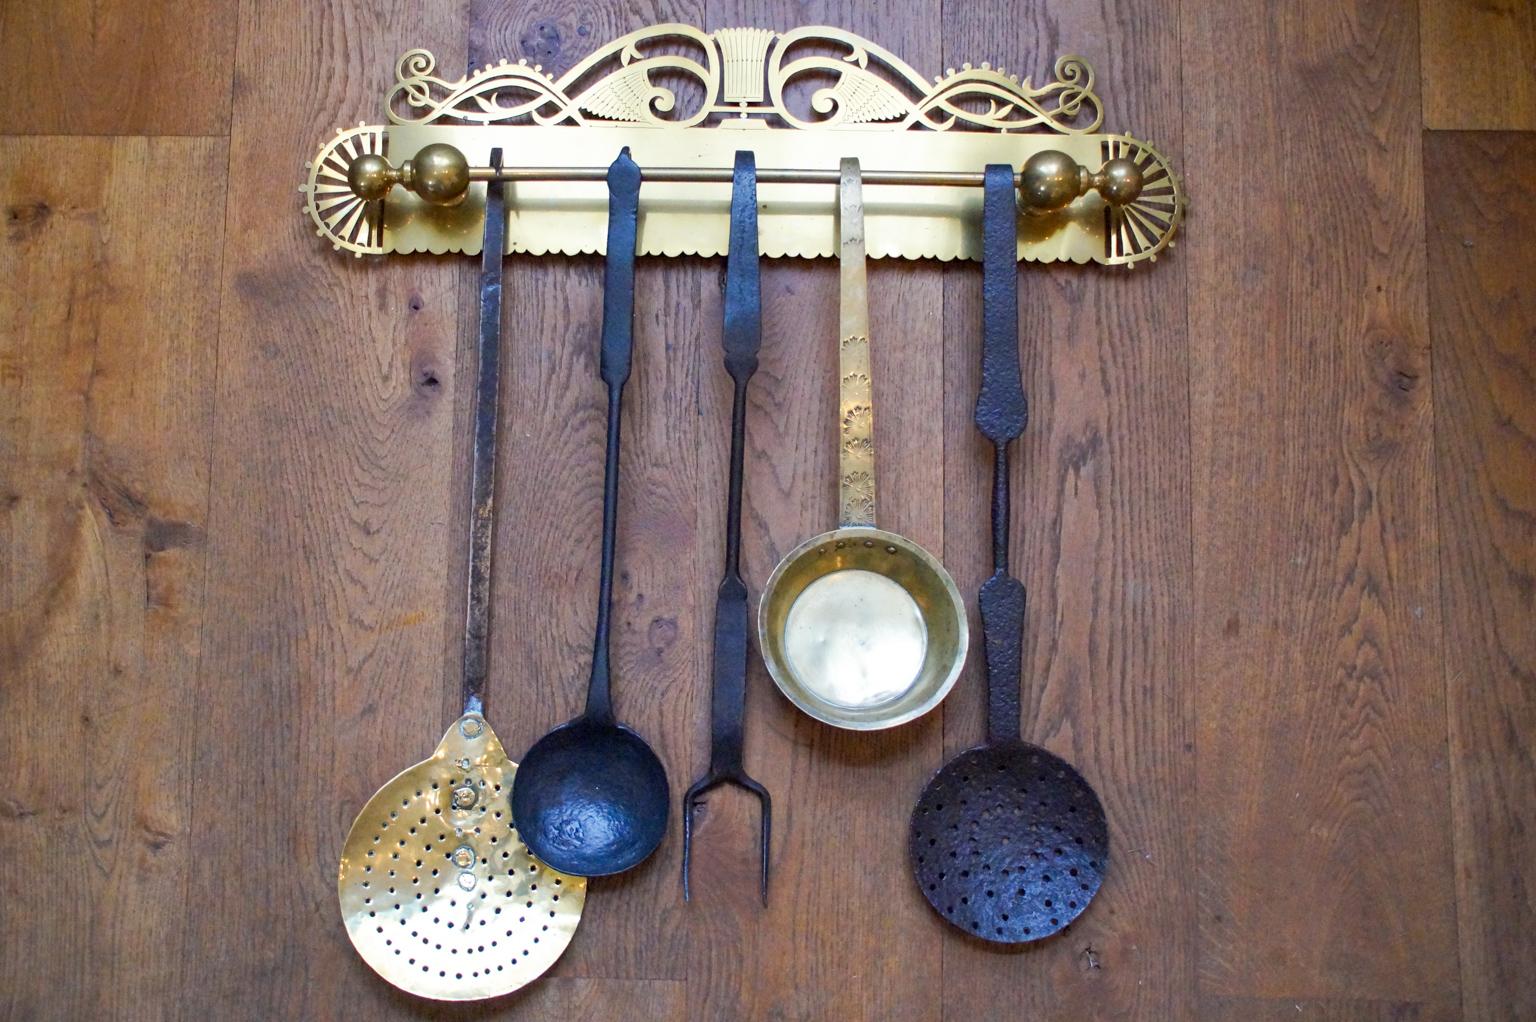 Beautiful 18th-19th century Dutch Louis XV fireplace tool set consisting of a hanger and five fire irons and kitchen tools. From left to right is included a brass skimmer with a wrought iron handle, a wrought iron ladle, a wrought iron tasting fork,